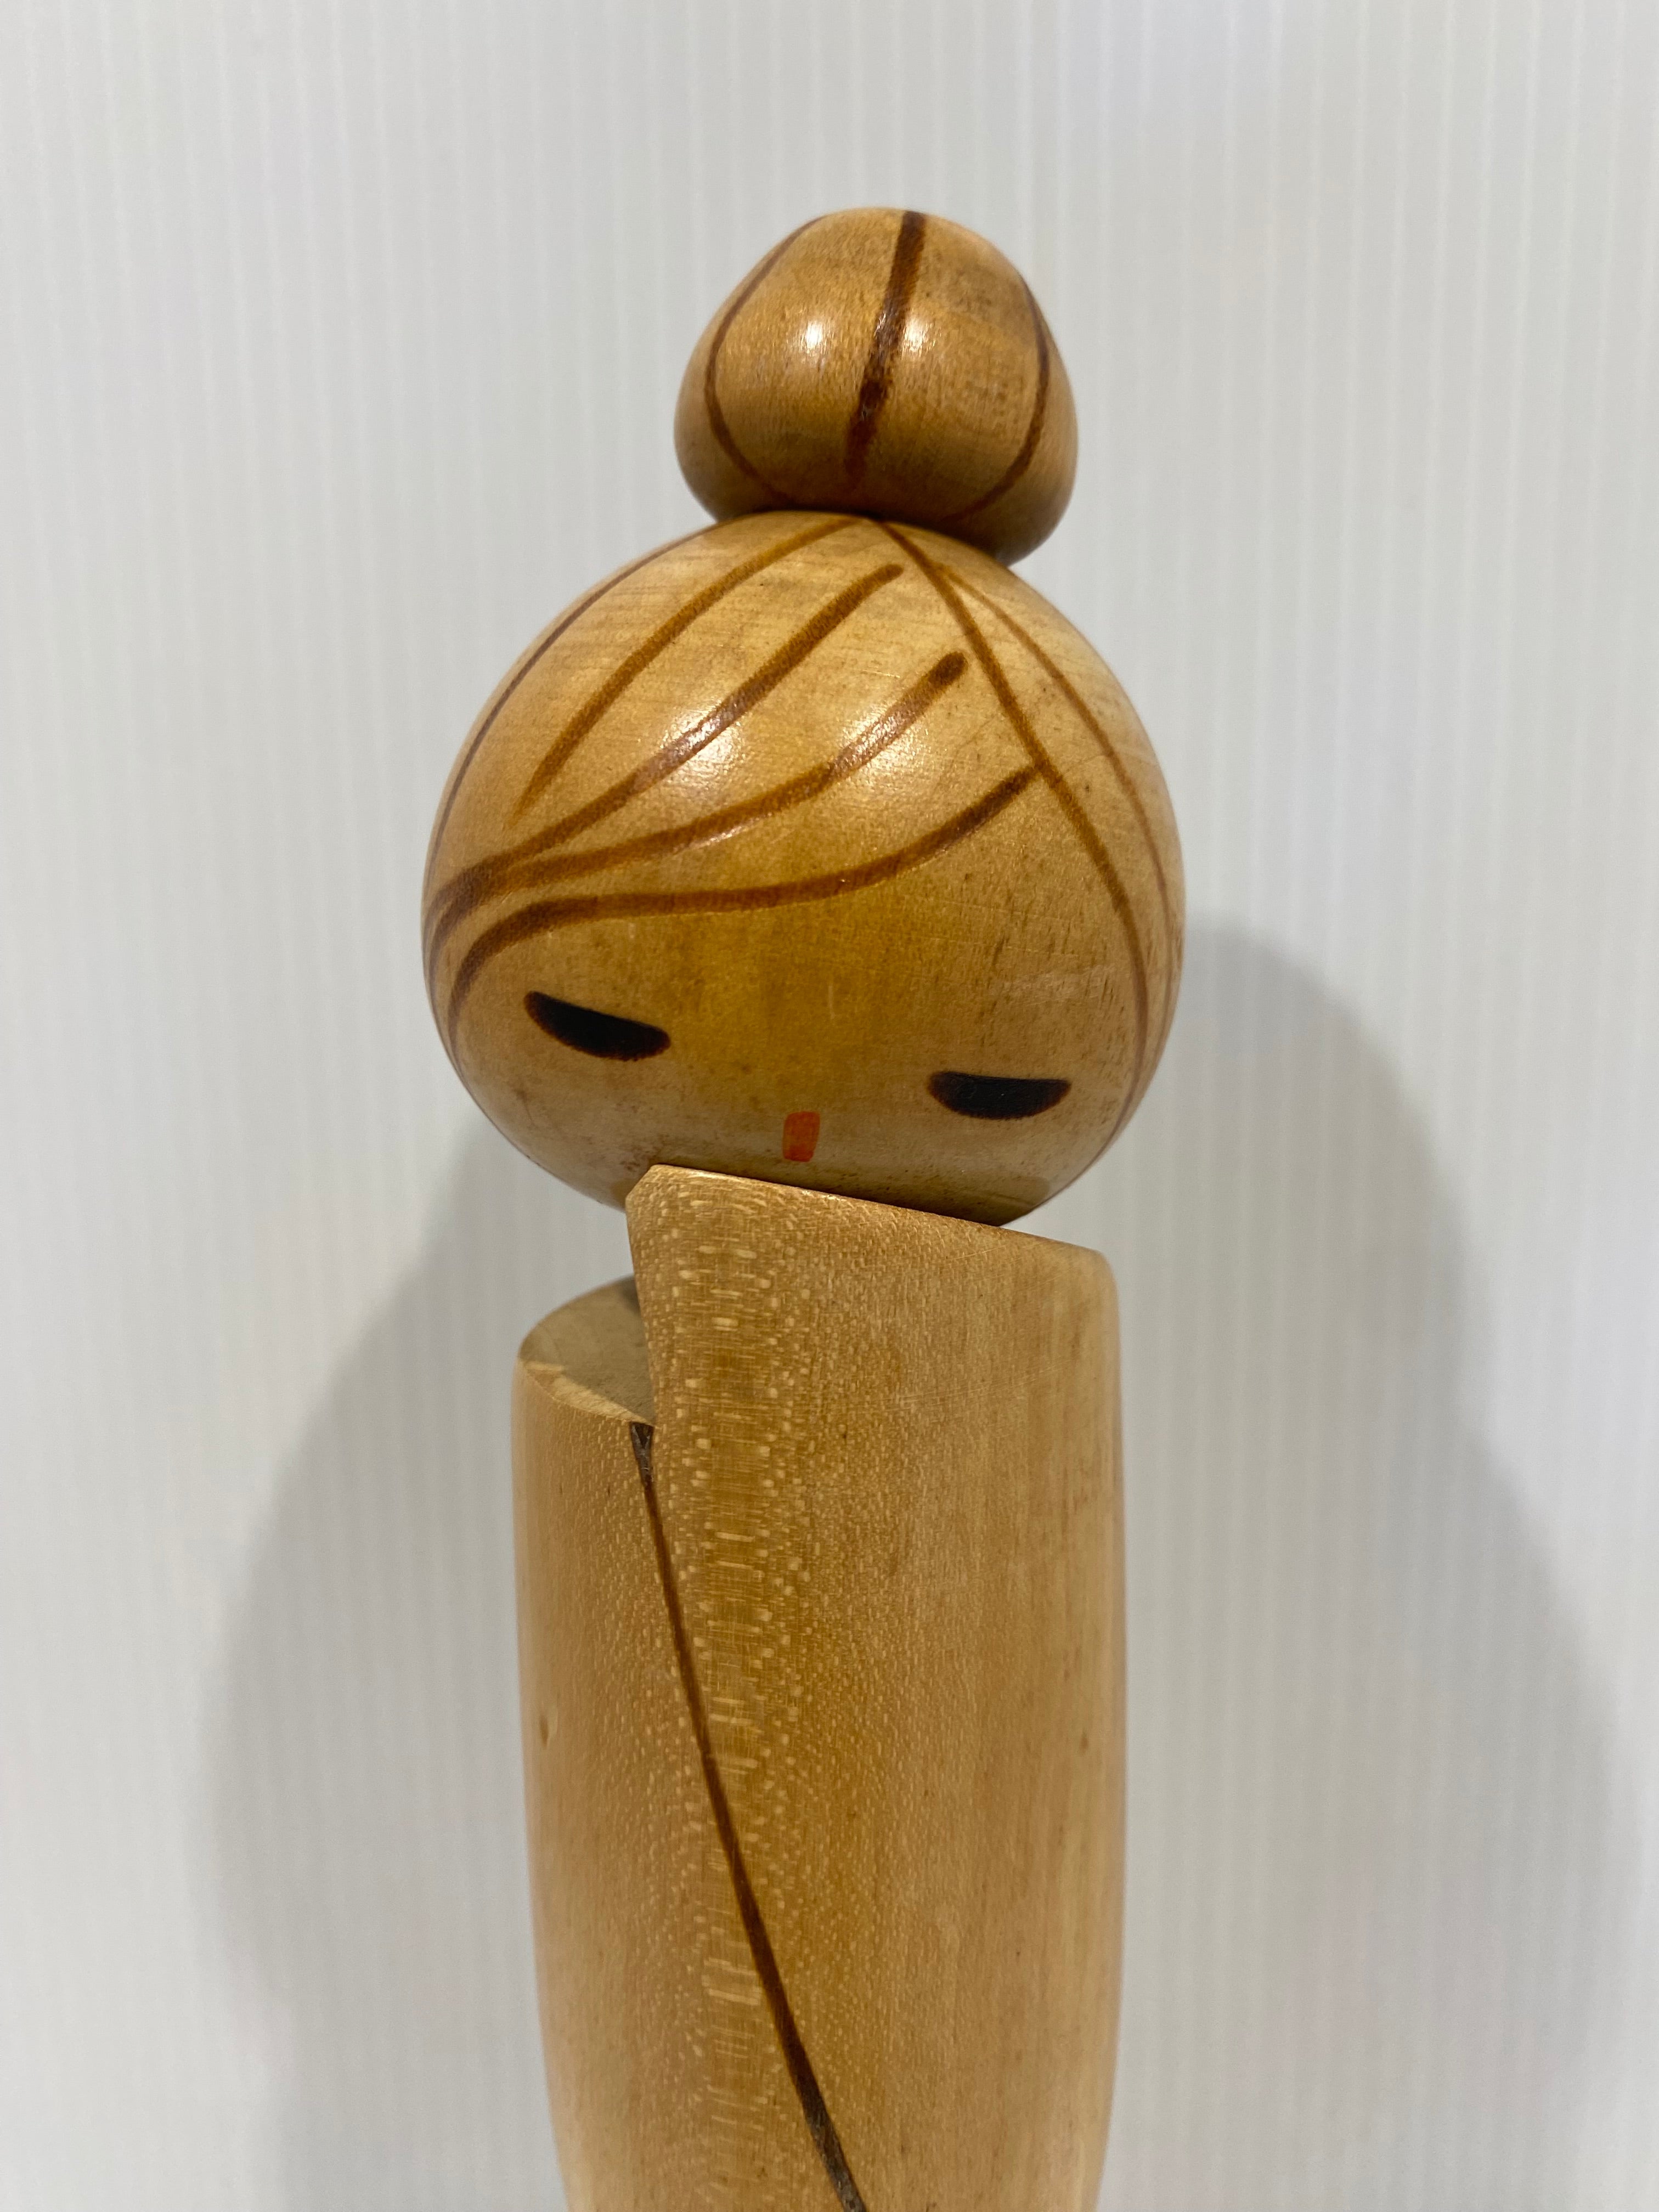 Beautiful Vintage Japanese Kokeshi doll . 1940s  Signed on the bottom by the Kokeshi maker